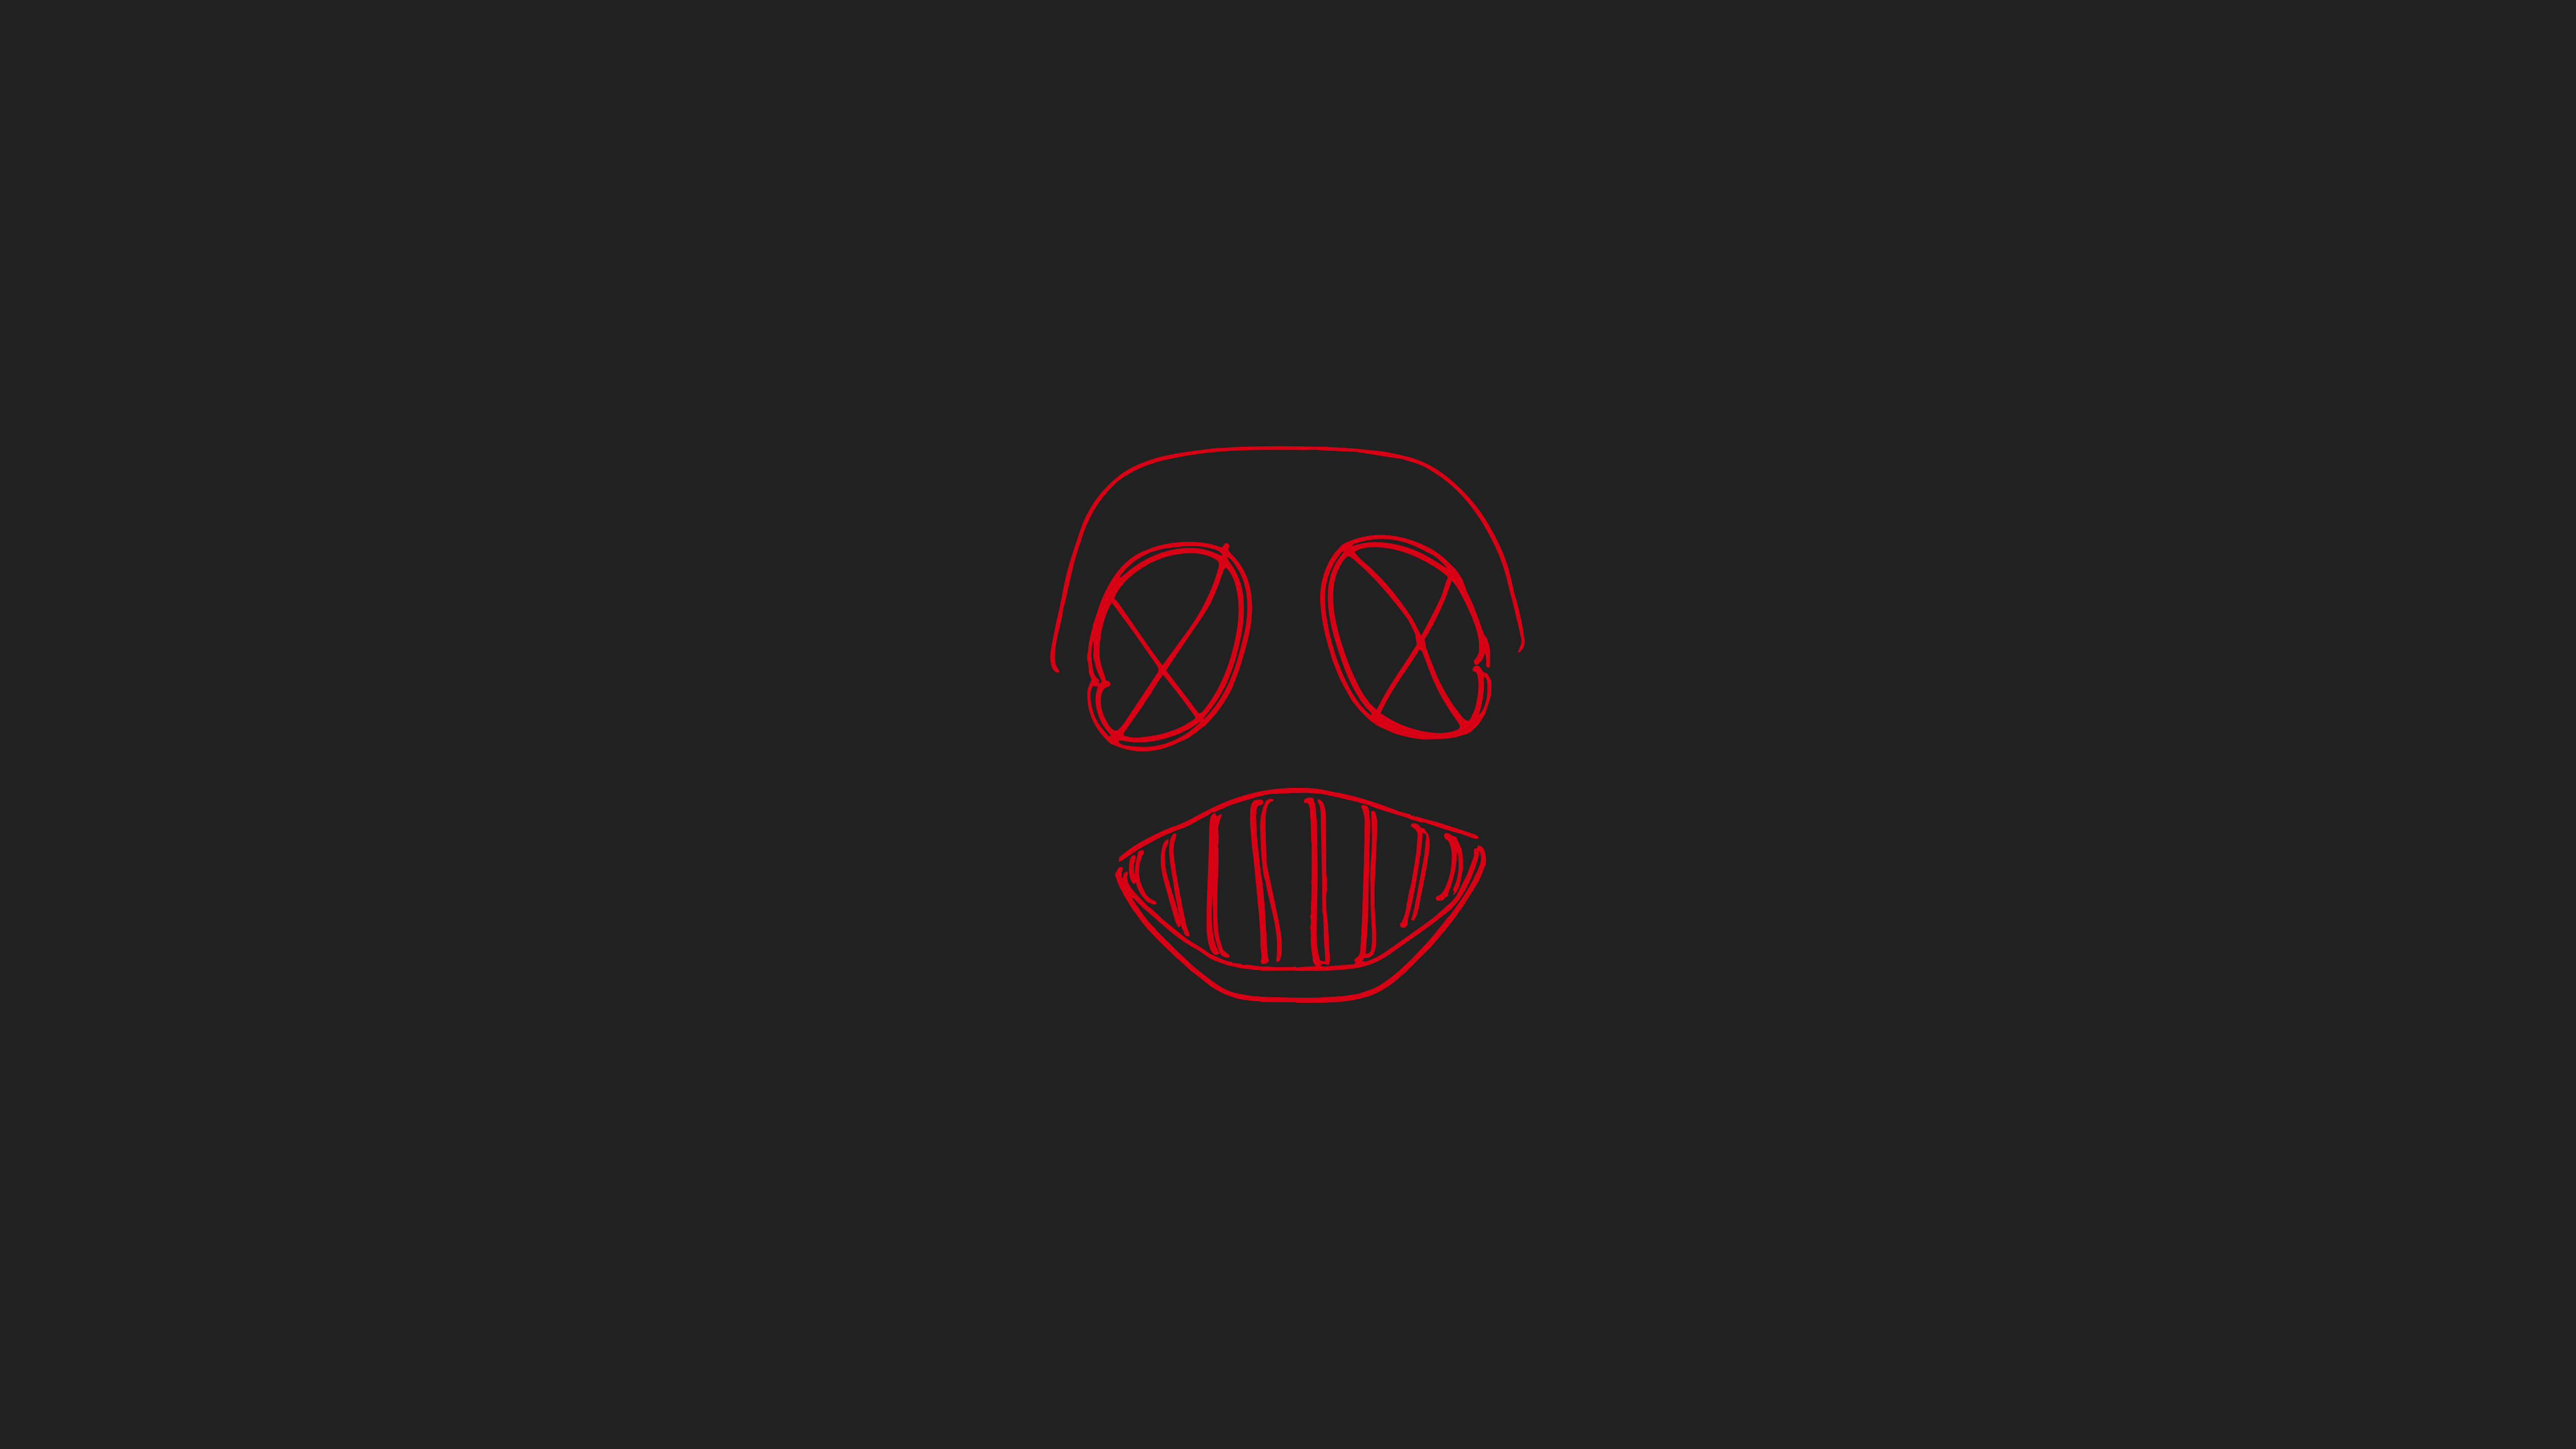 Wallpaper, mask, neon, cybernetics, cyber, hackers, hacking, digital, art gallery, red, dark, computer, security, fantasy art, outlaws, criminal, photography, game logo, LED headlight, LEDs, Light armor, Platinum Conception Wallpaper 5120x2880